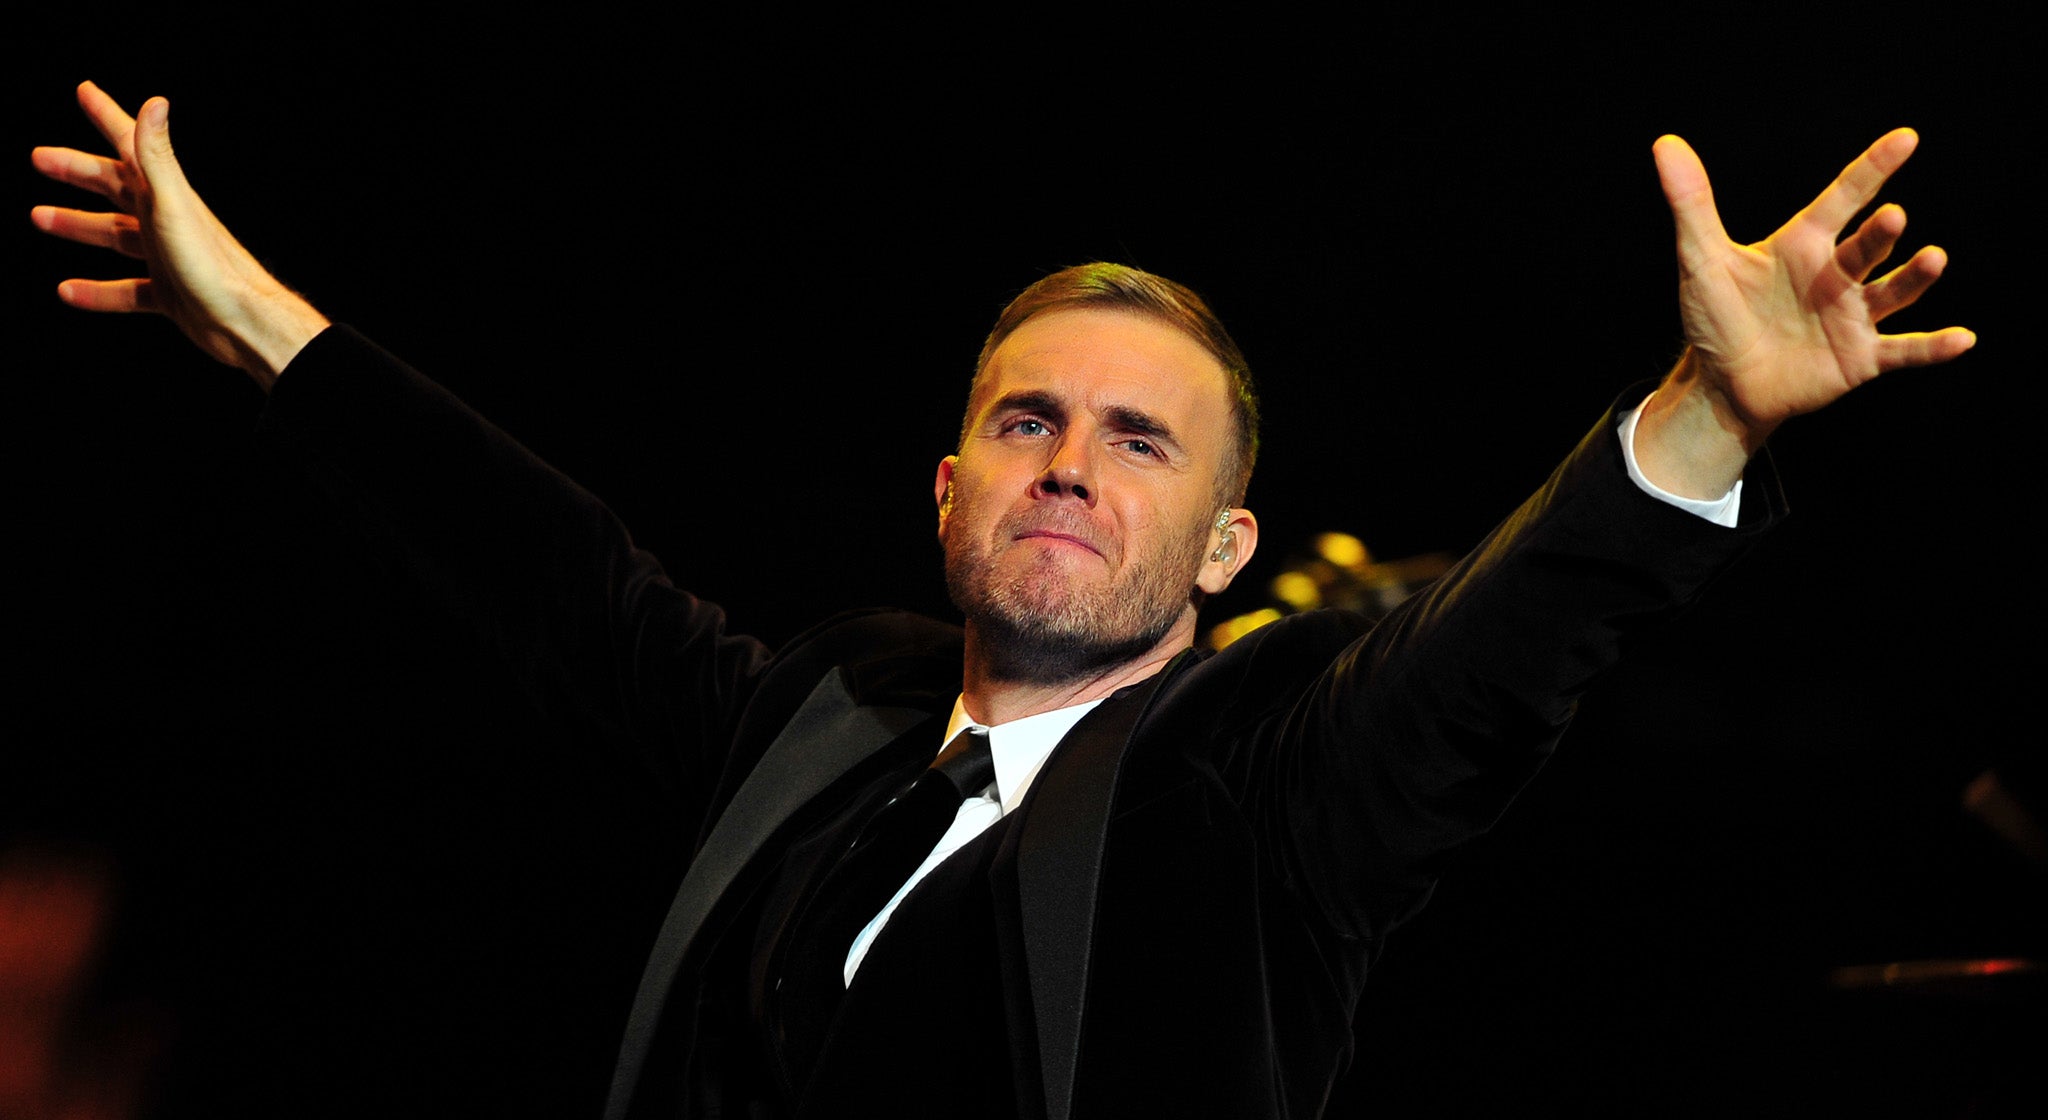 Take That member and X Factor judge Gary Barlow has announced his first solo album in 14 years.